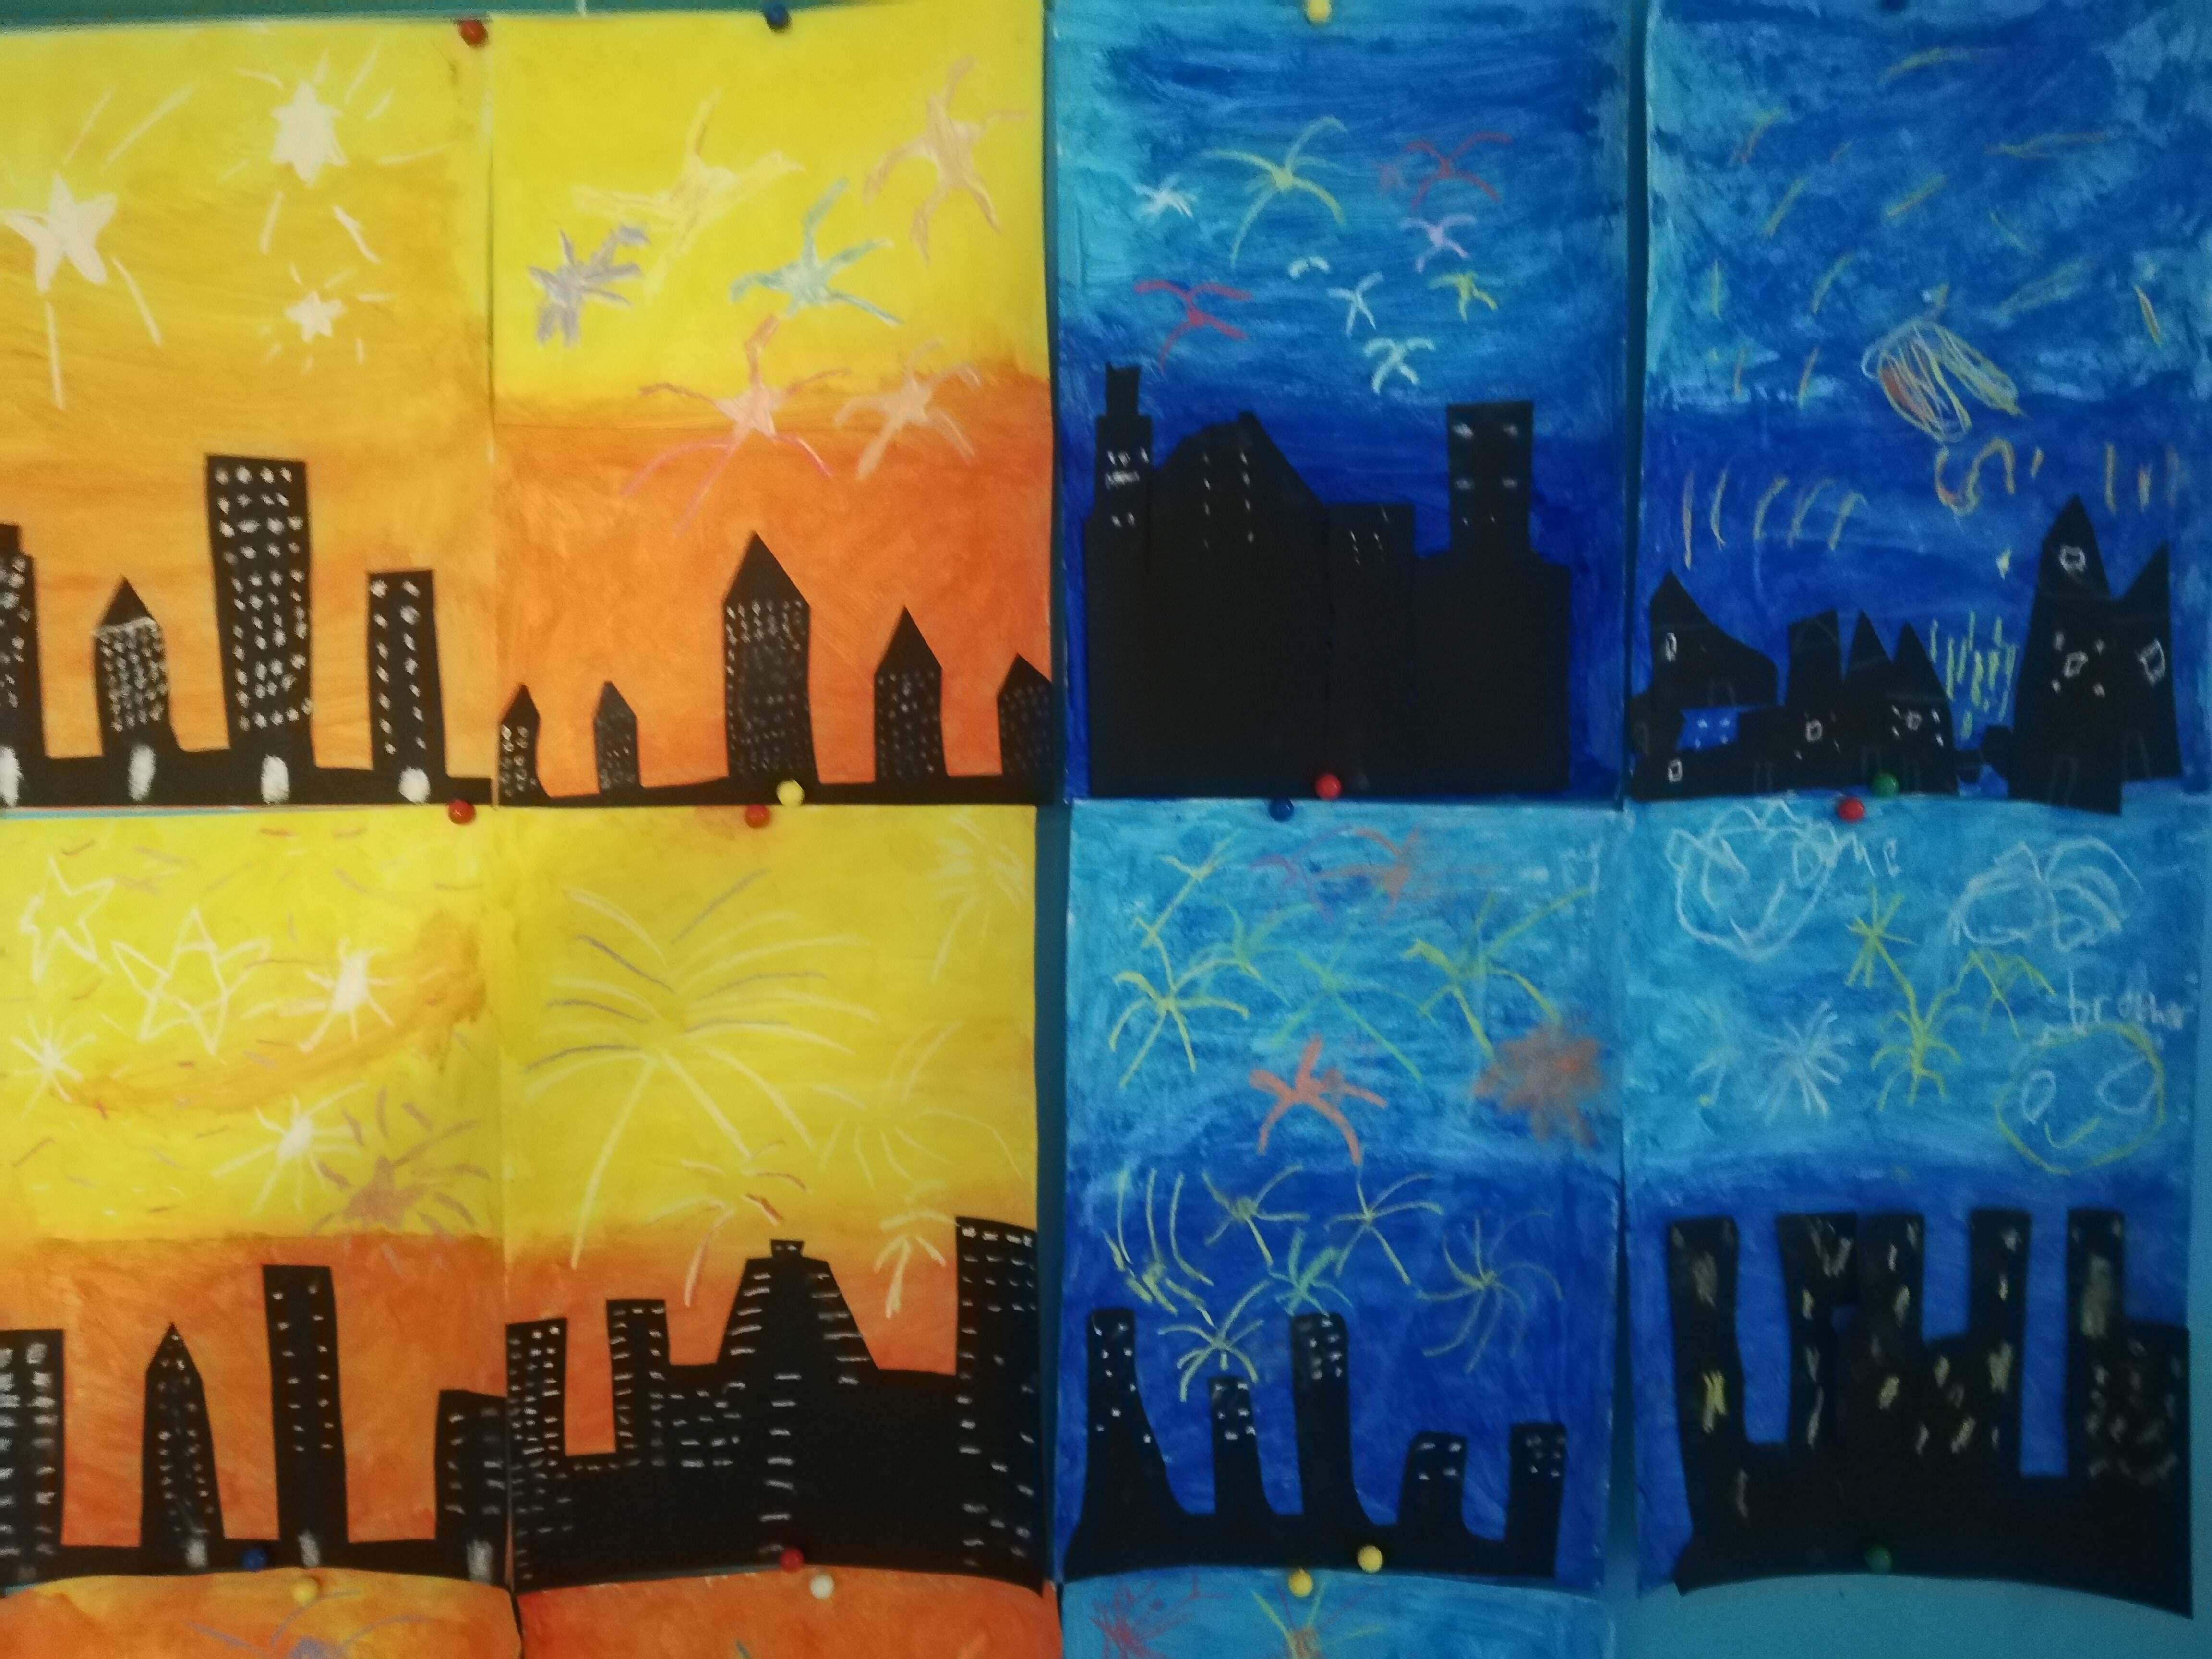 The children created a mini city with some wonderful blended skies.